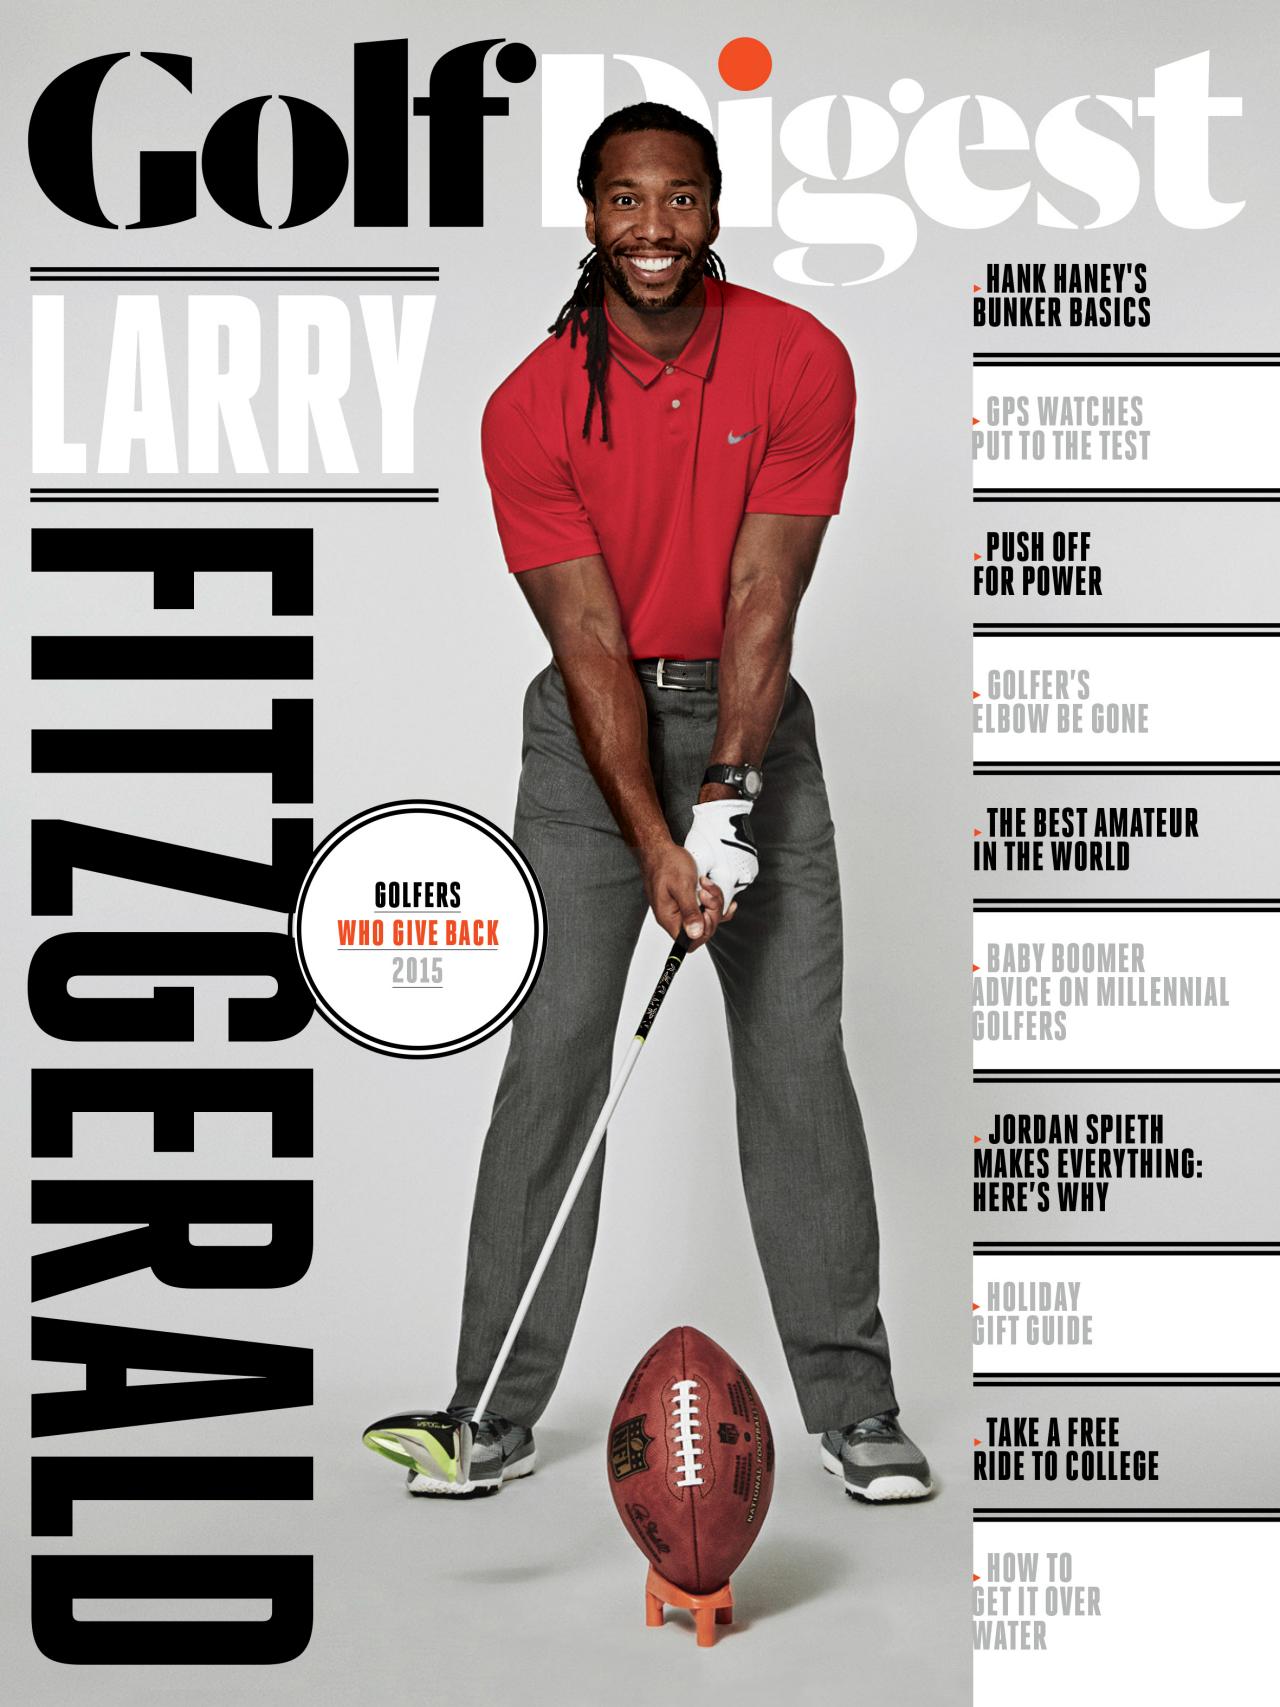 Arizona Cardinals Gift Guide: 10 must-have Larry Fitzgerald items